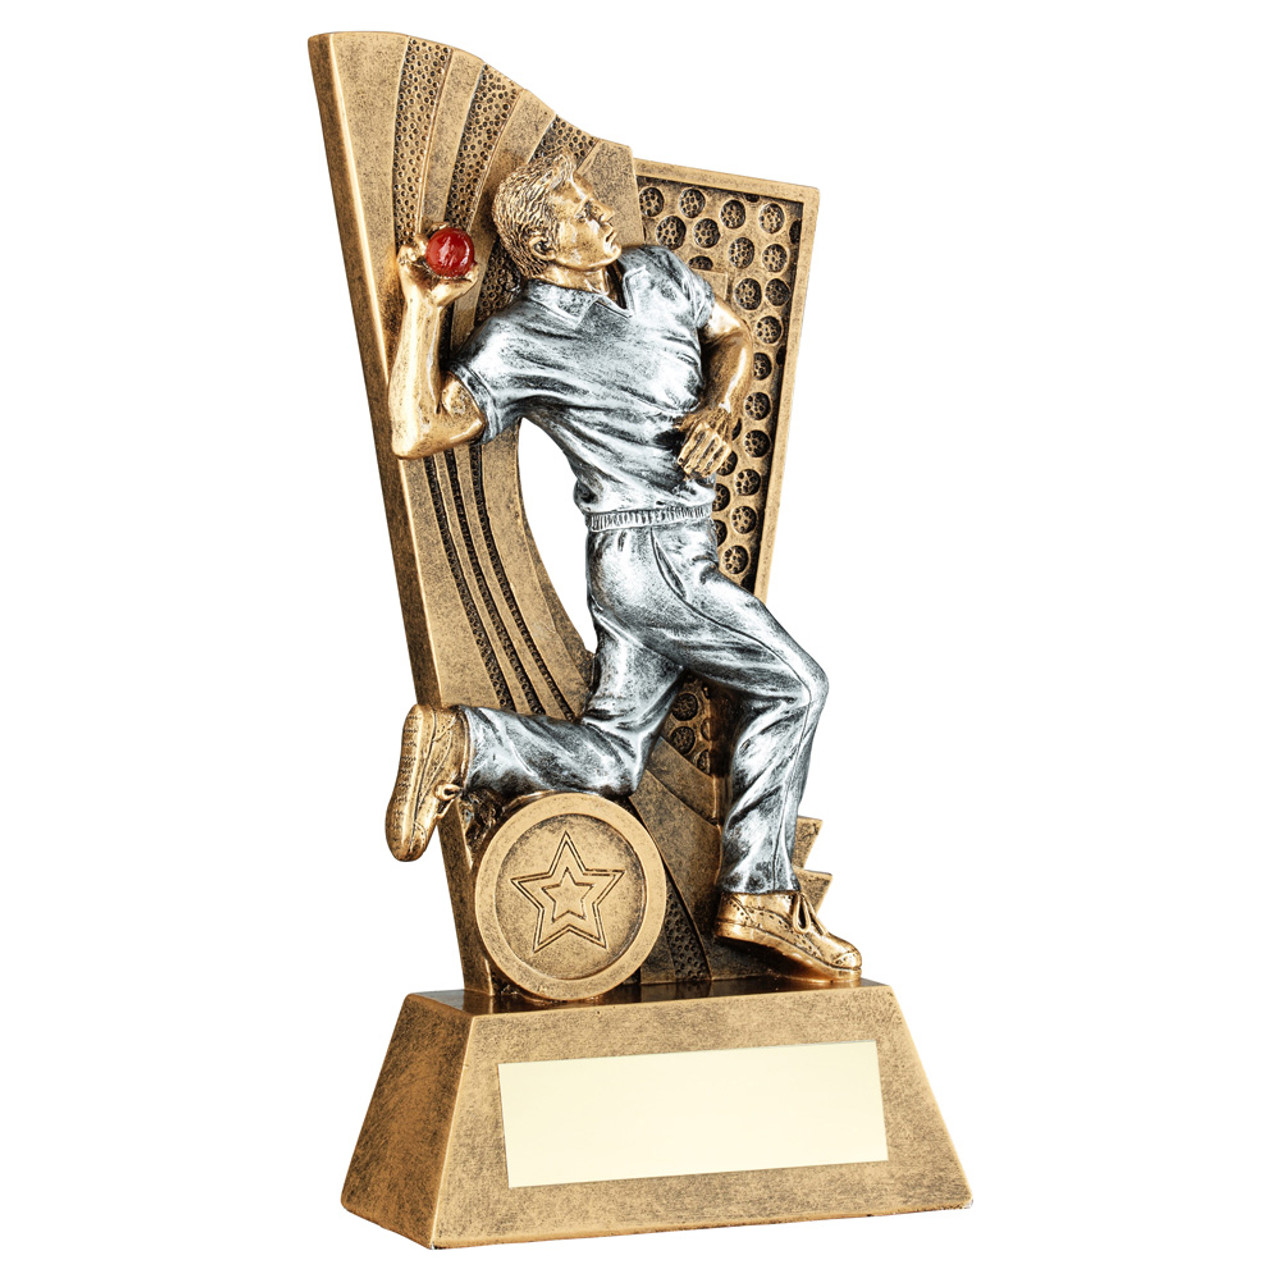 Fabulous cricket bowler backdrop trophy available with free engraving from 1stPlace4Trophies